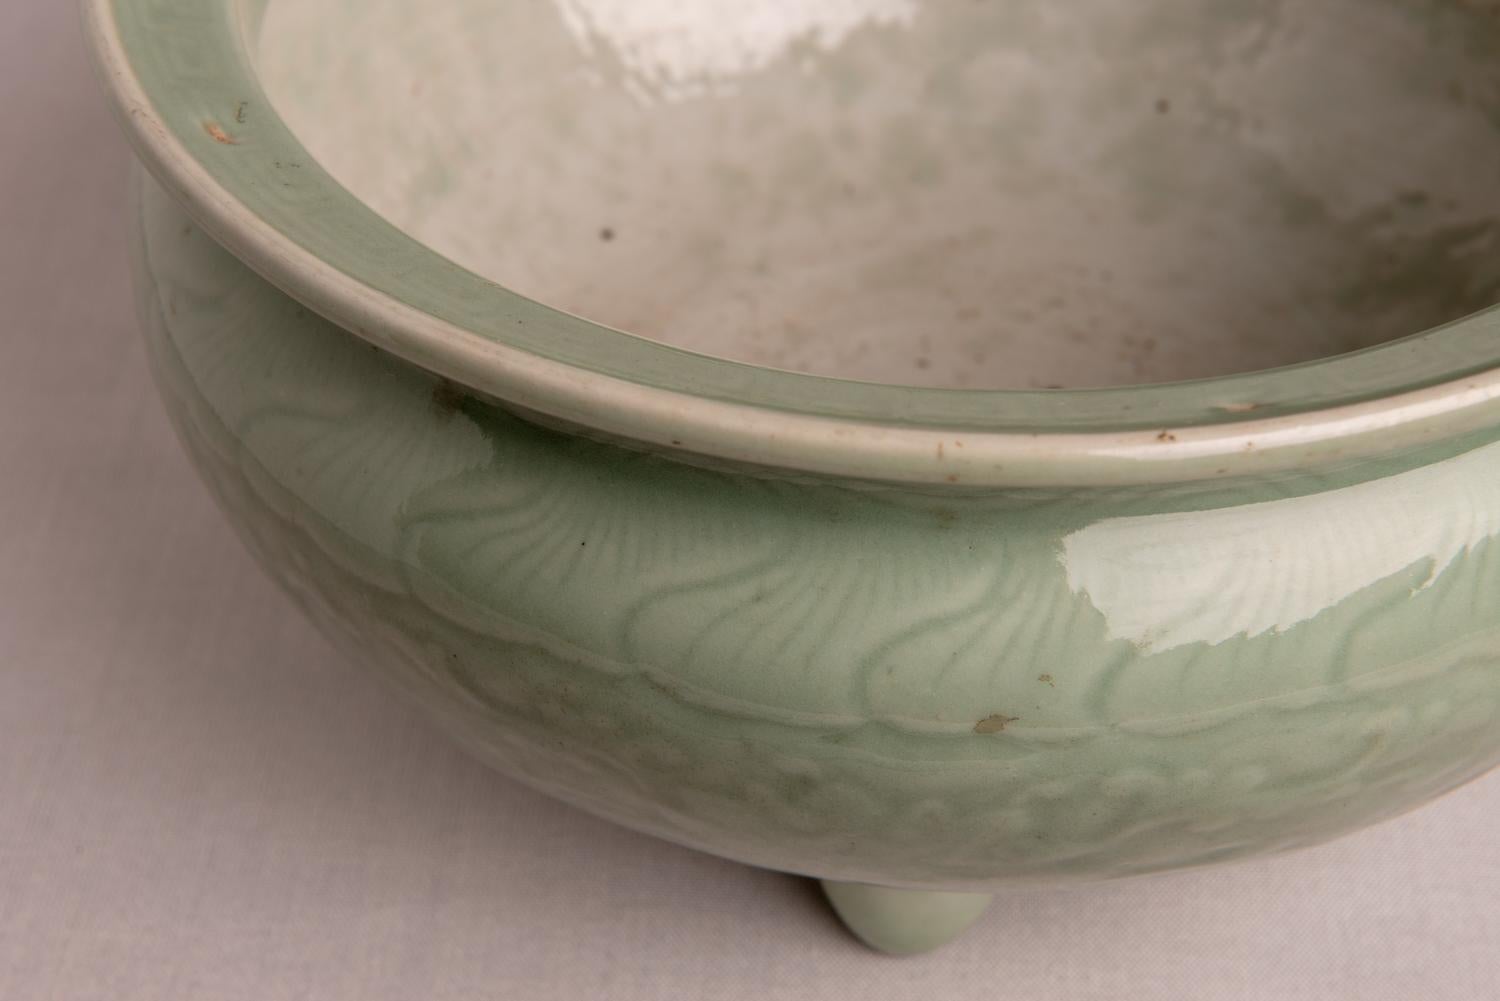 Antique perfect Celadon bowl : interesting for connoisseurs. It's from 18th century and it's perfect. It was in a private Italian collection.
O/481.